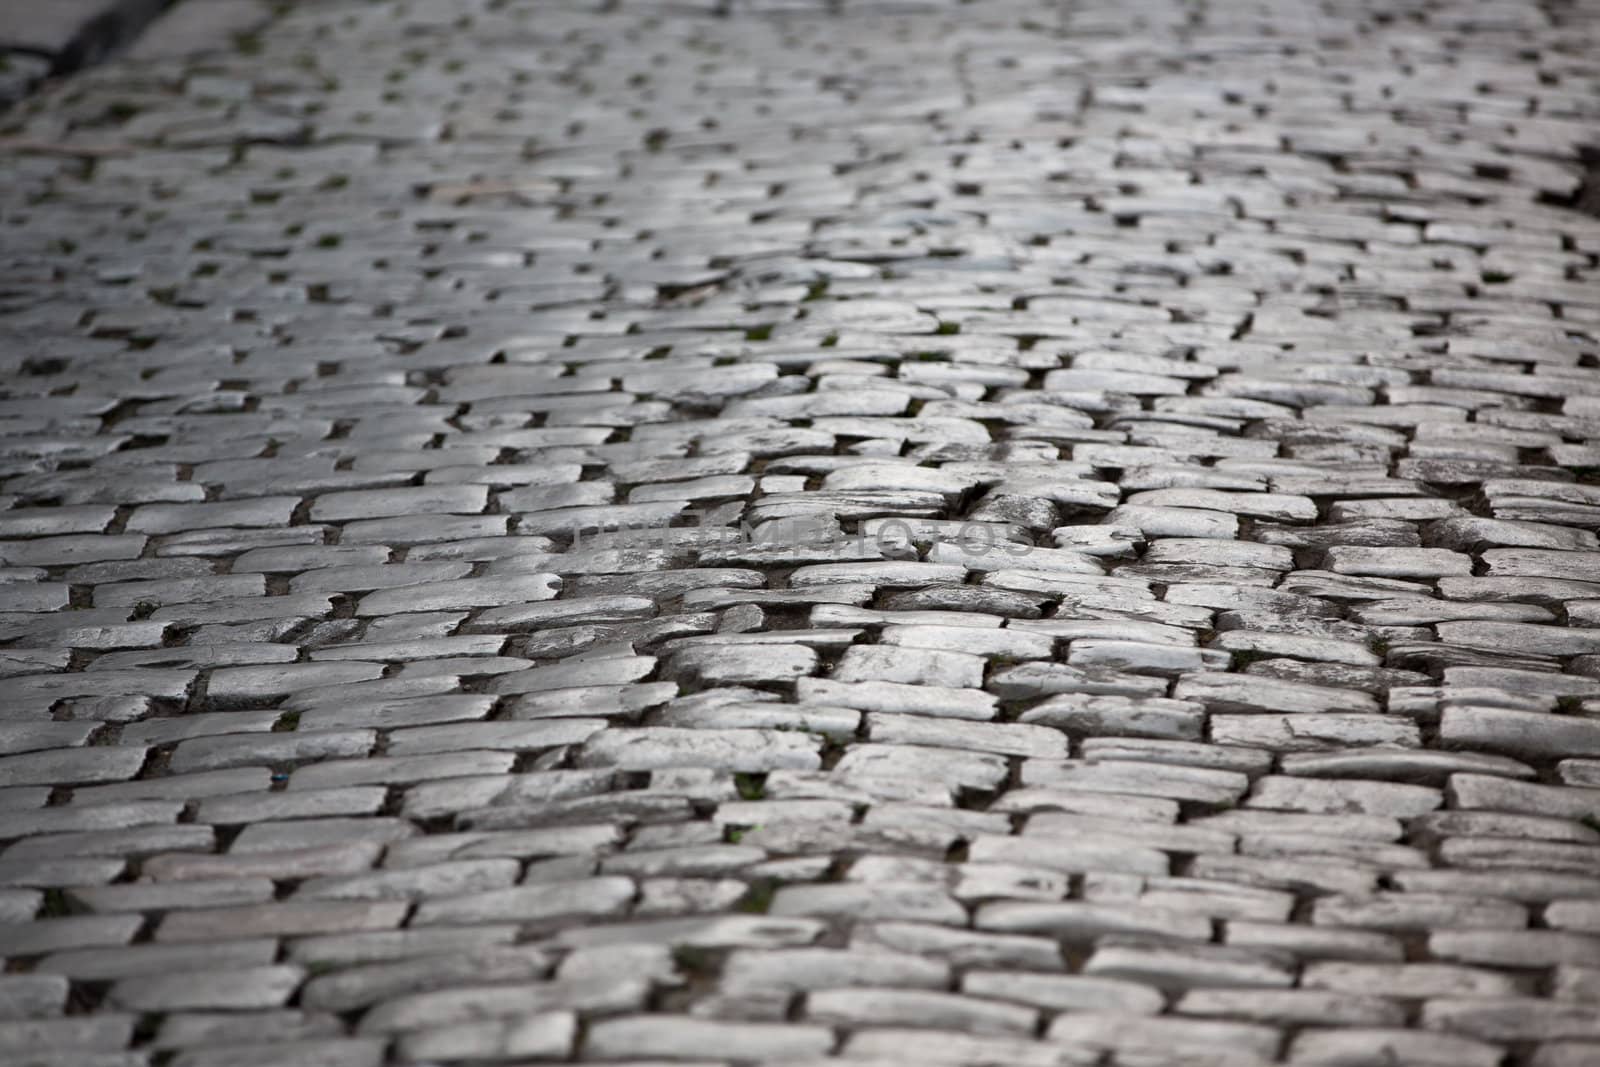 Manmade Pavement by coskun